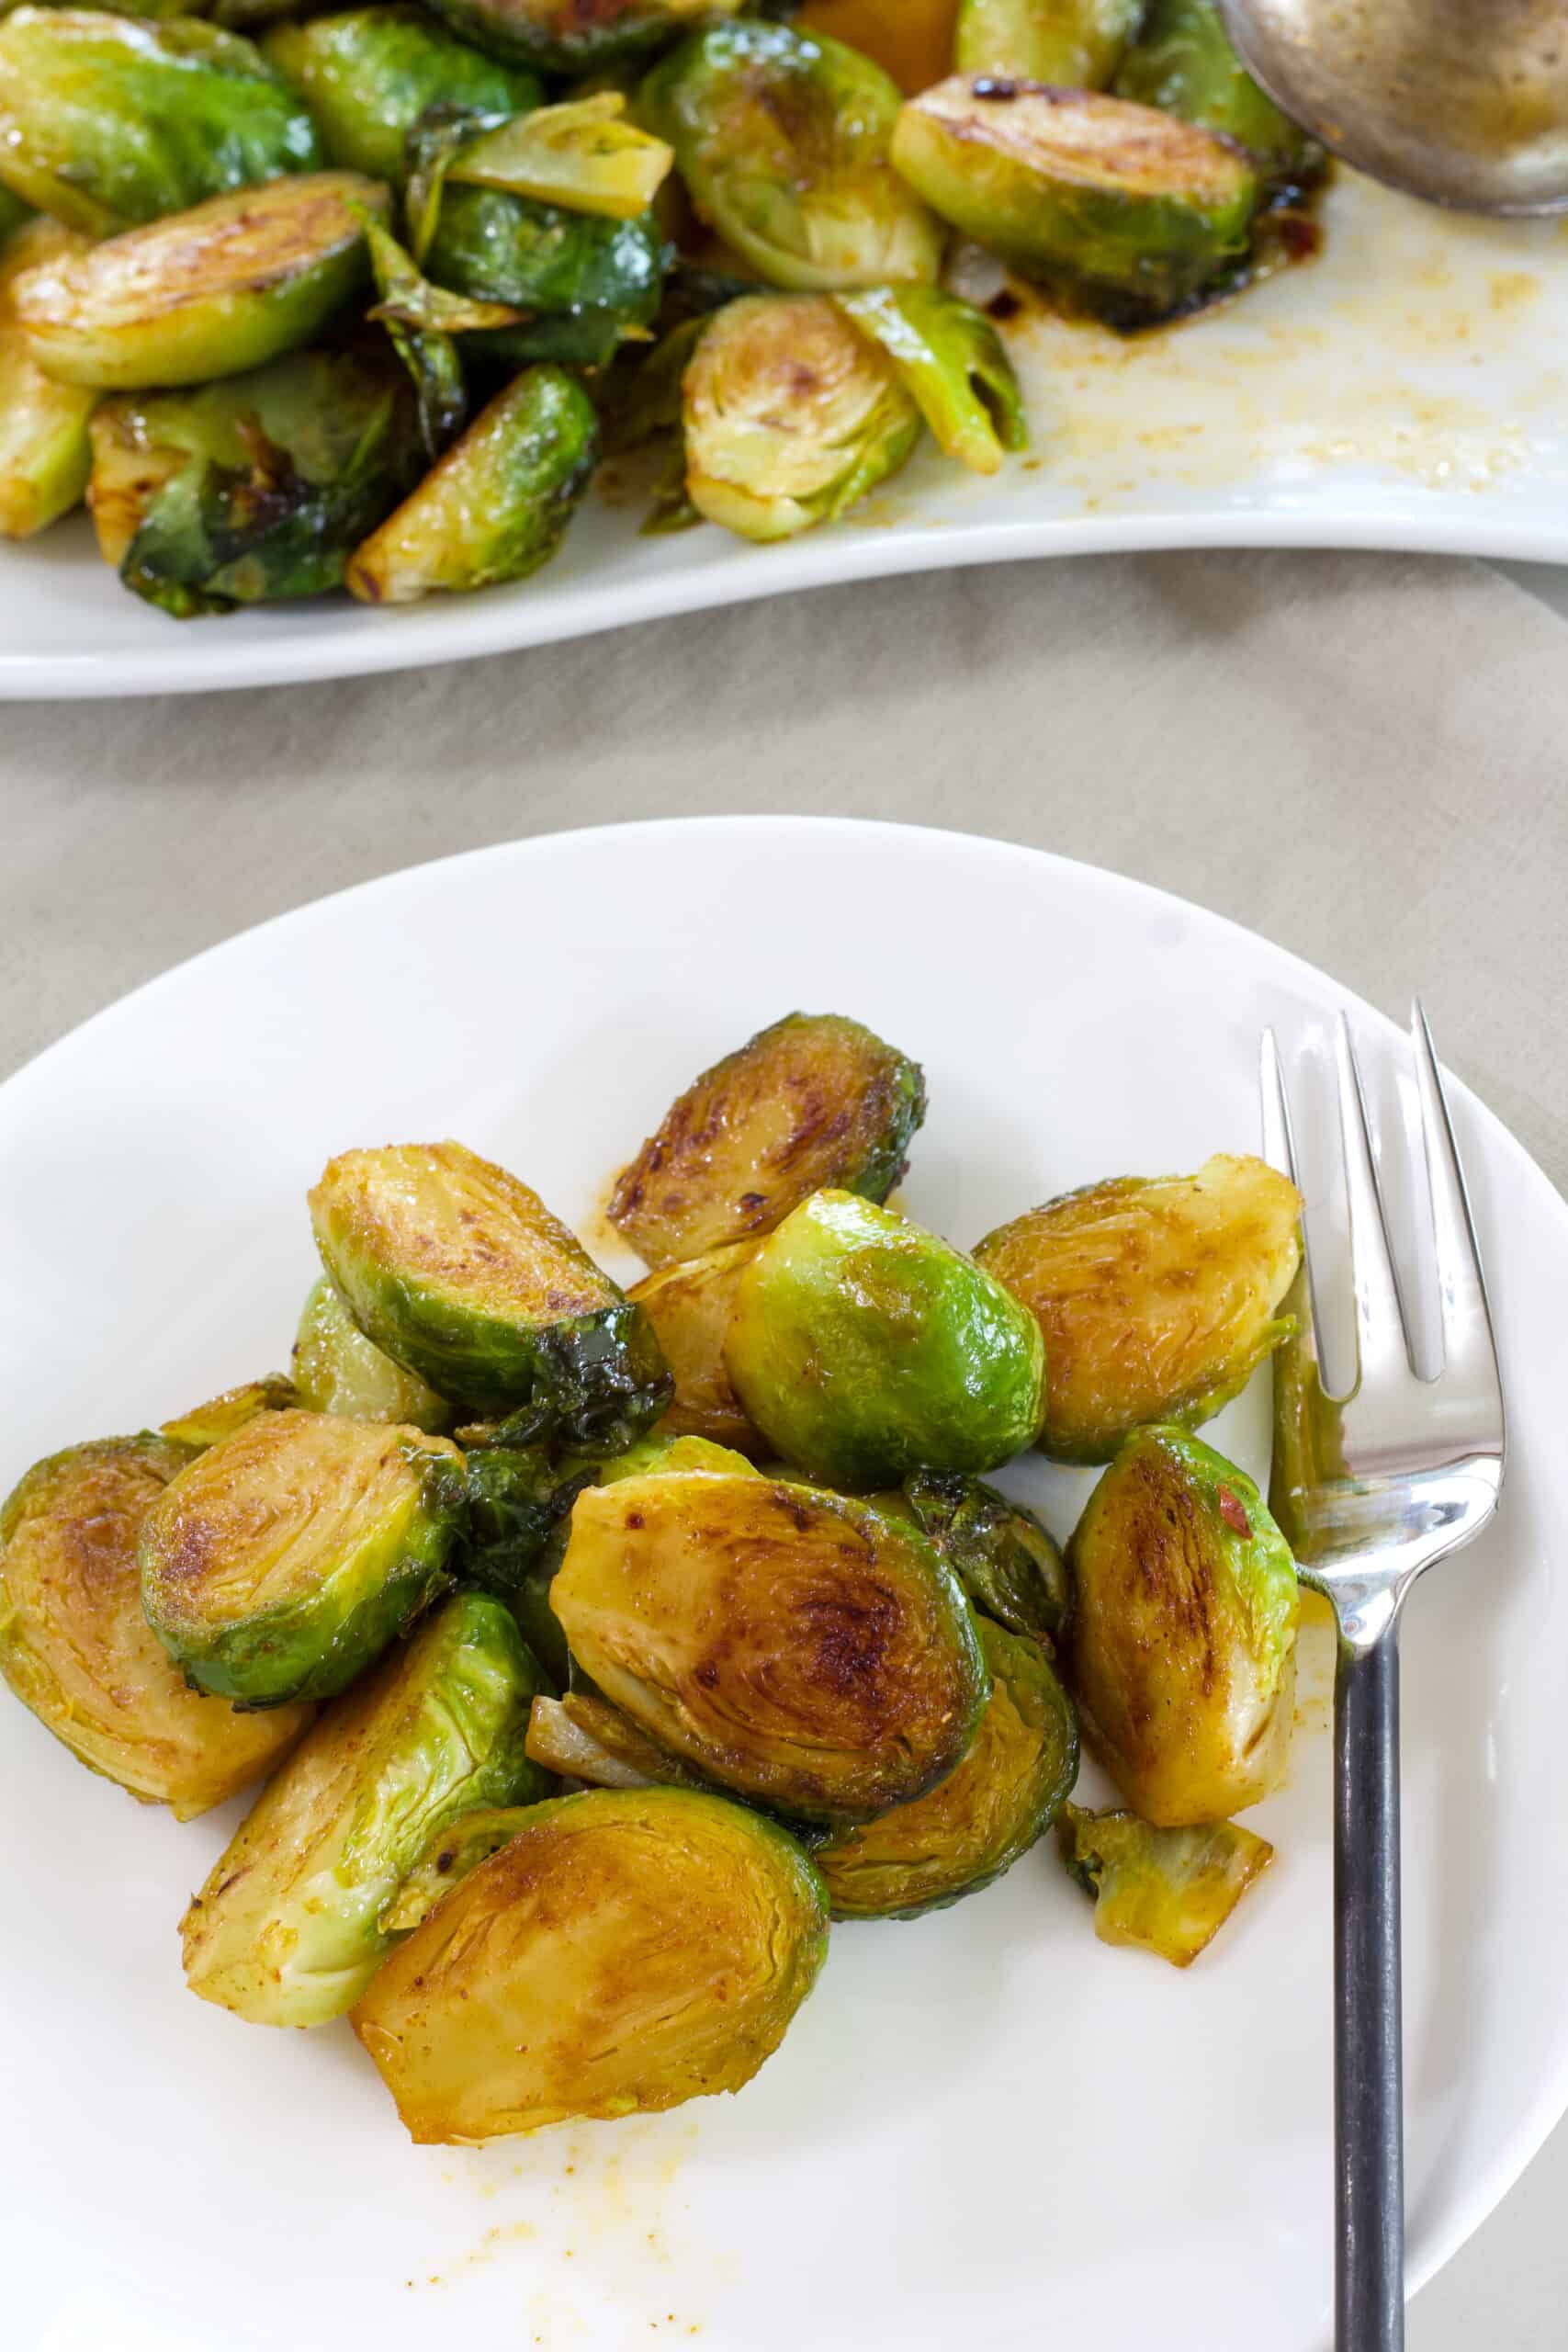 A white plate with a serving of Brussels sprouts on it in the foreground and a plate of brussels sprouts in the background.